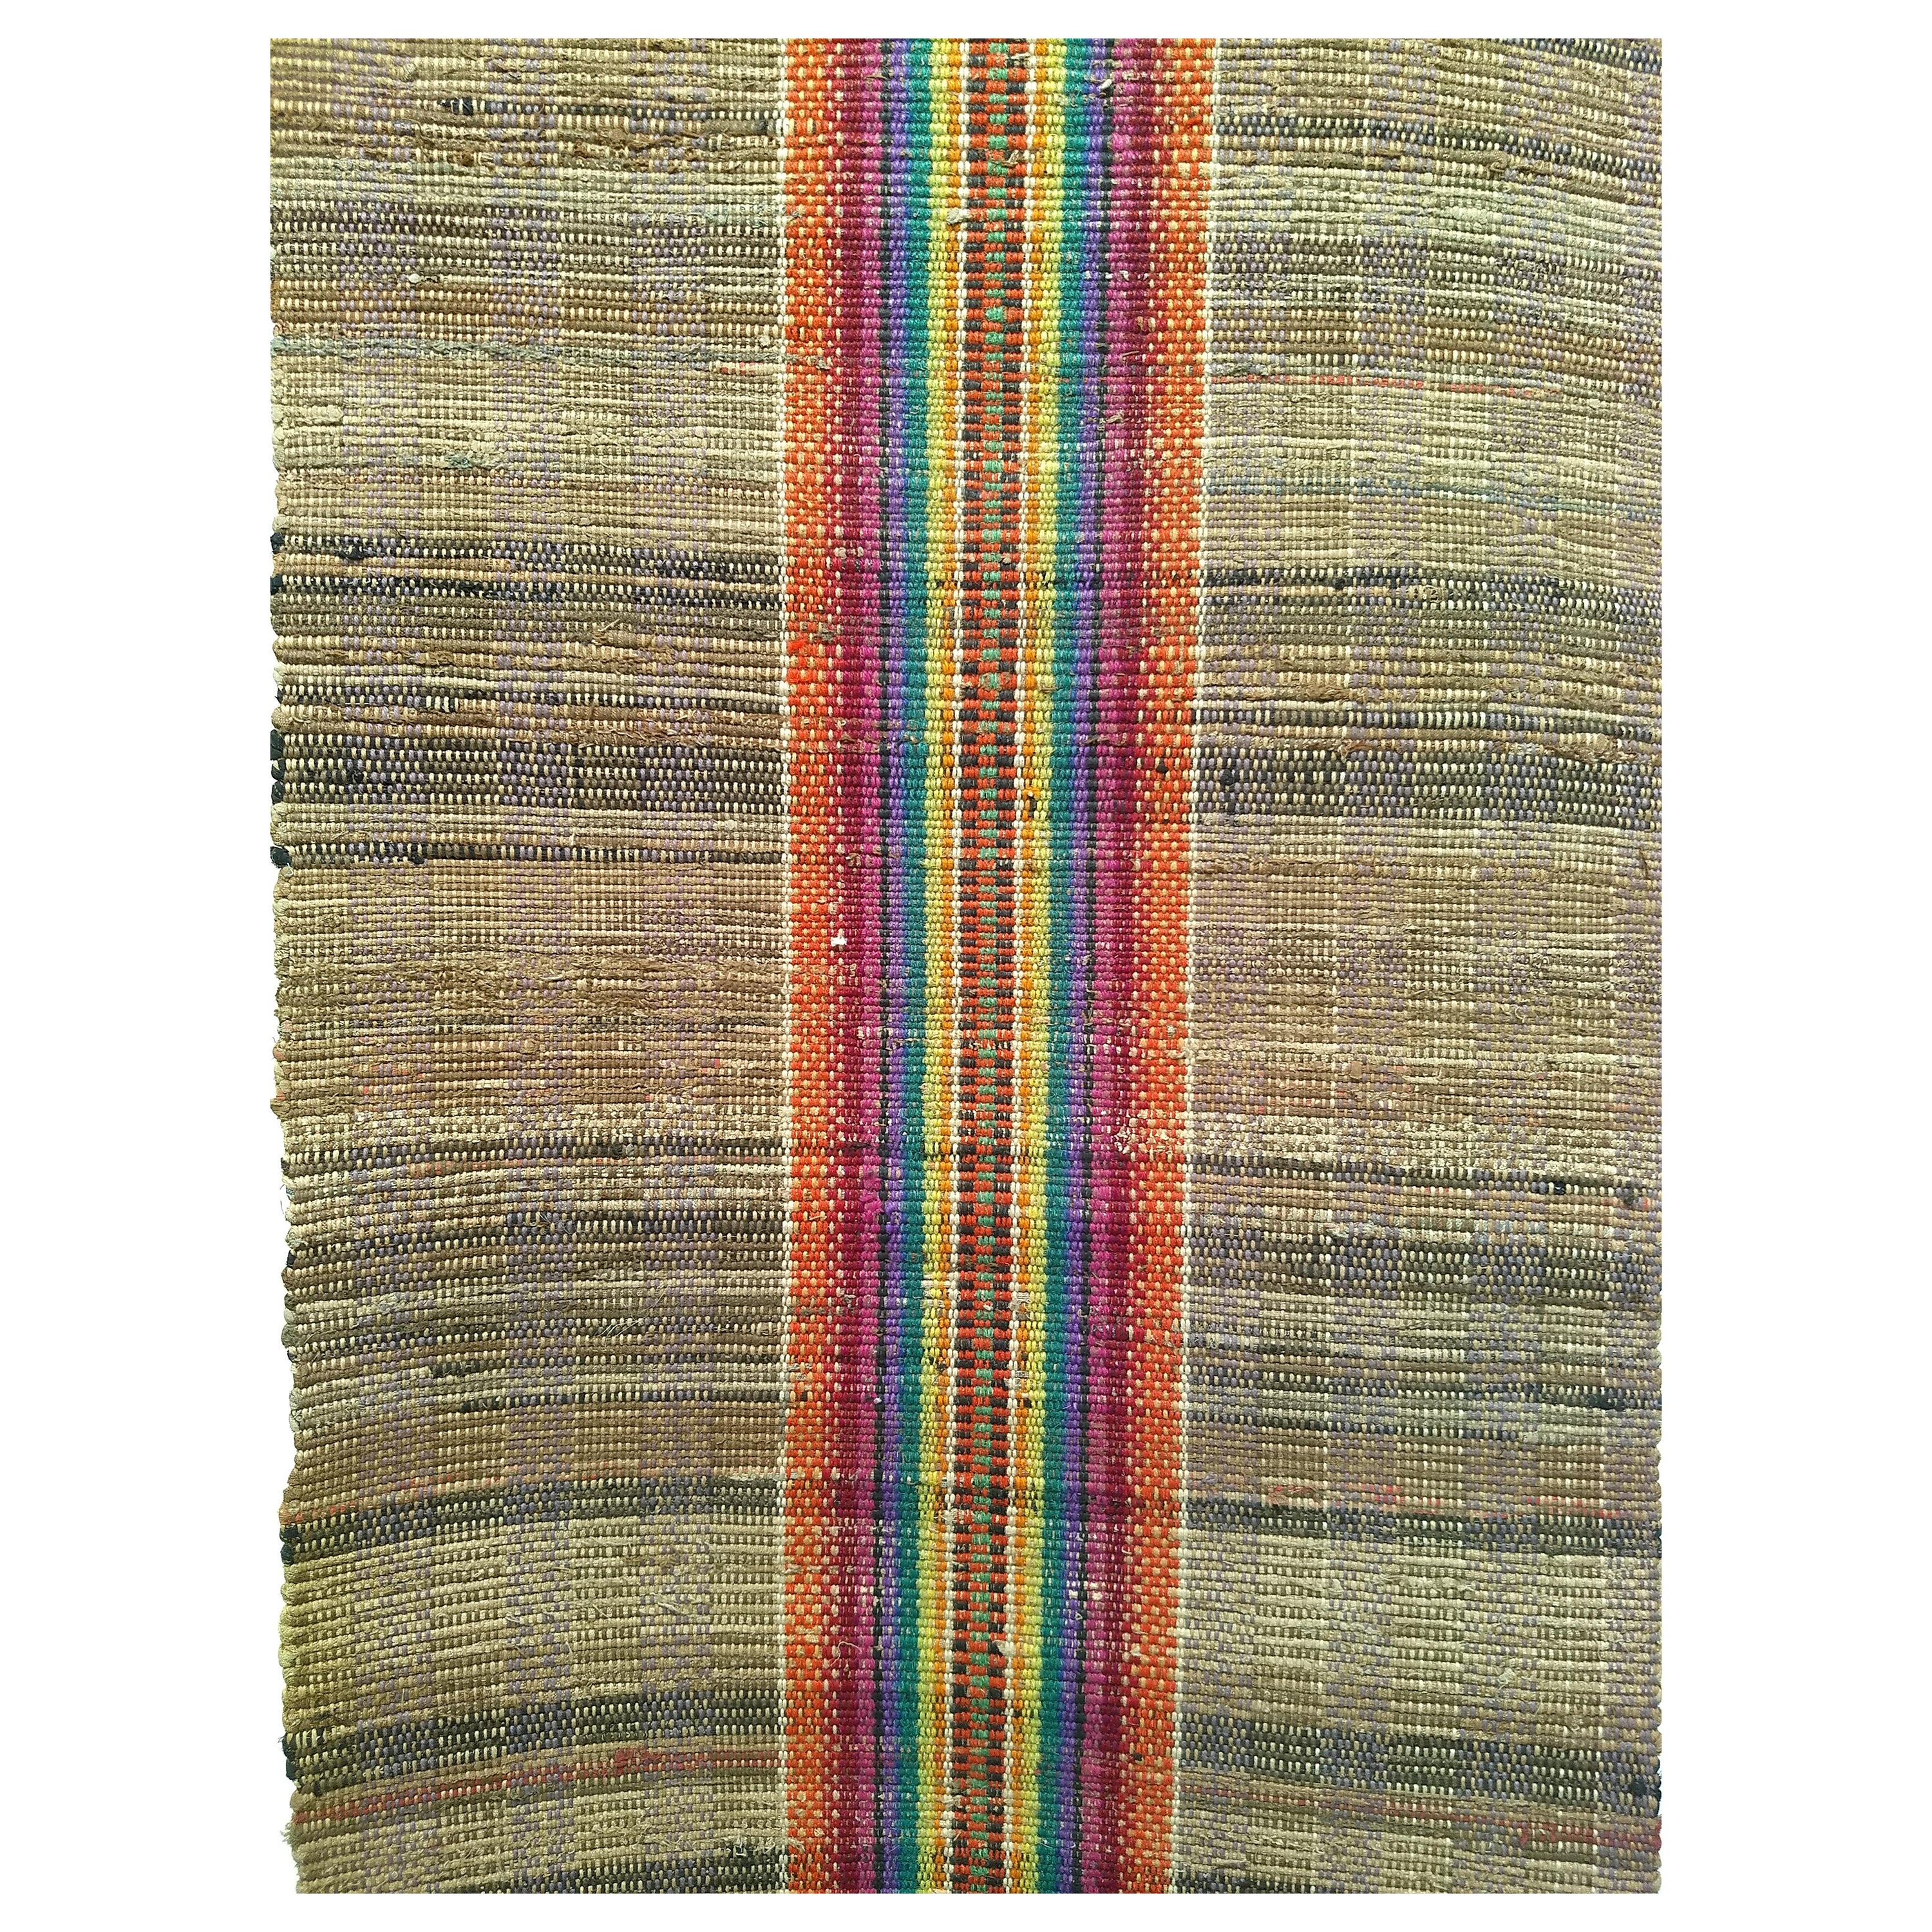 Vintage American Rag Runner in Taupe with Rainbow Colors Stripe Pattern